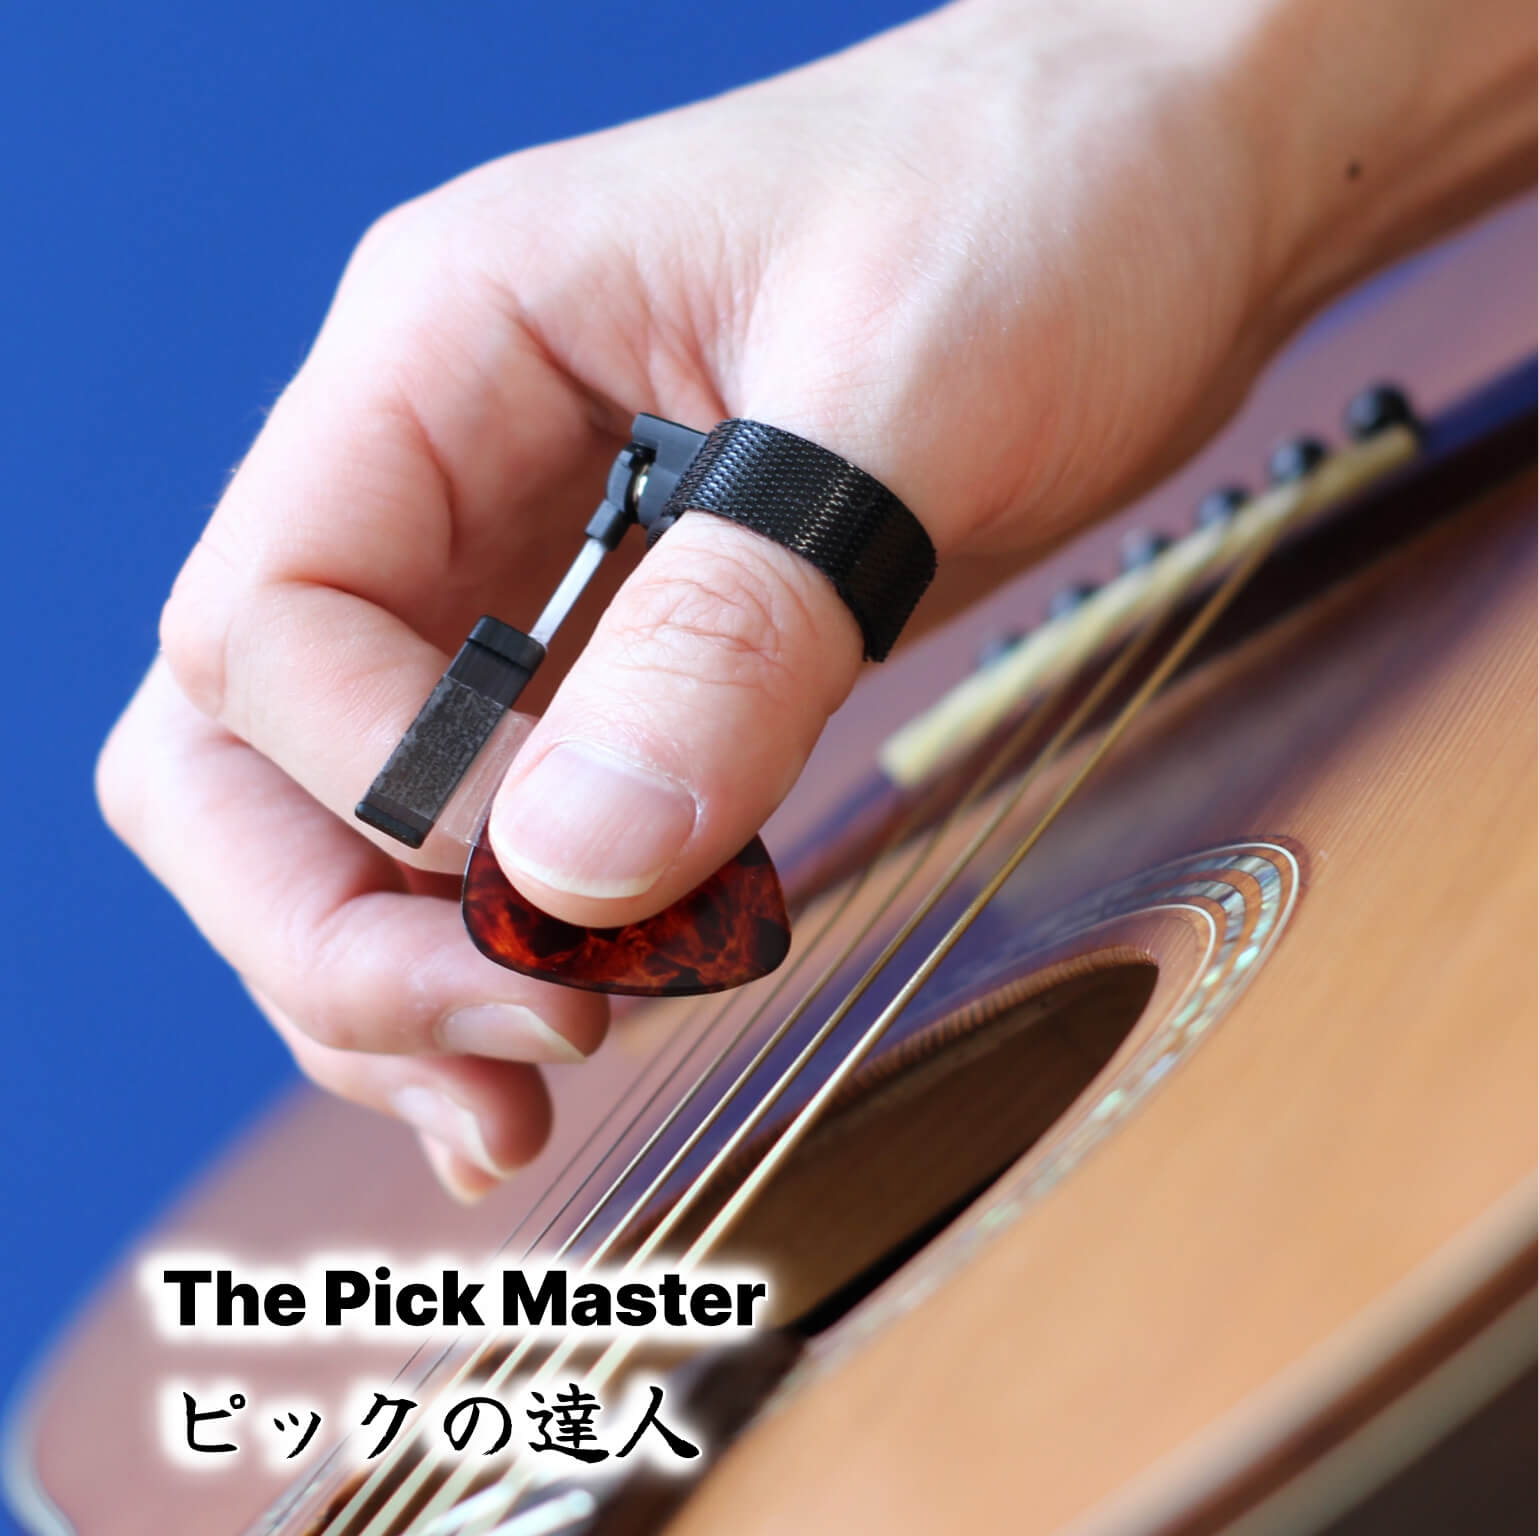 The Pick Master™